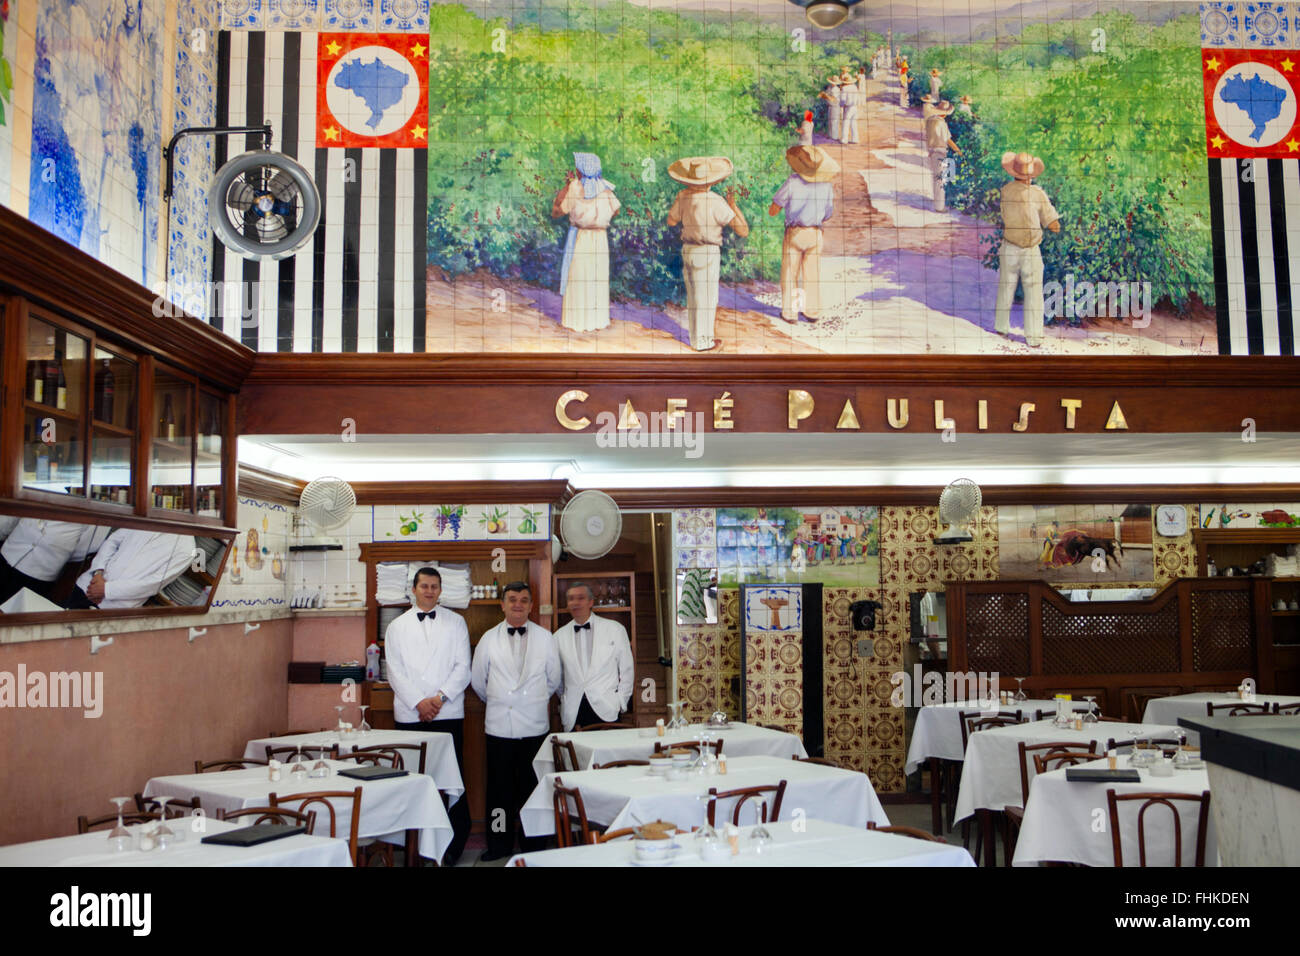 Cafe Paulista, a traditional Portuguese-style cafe restaurant in Santos, Sao Paulo state, Brazil, Latin America Stock Photo